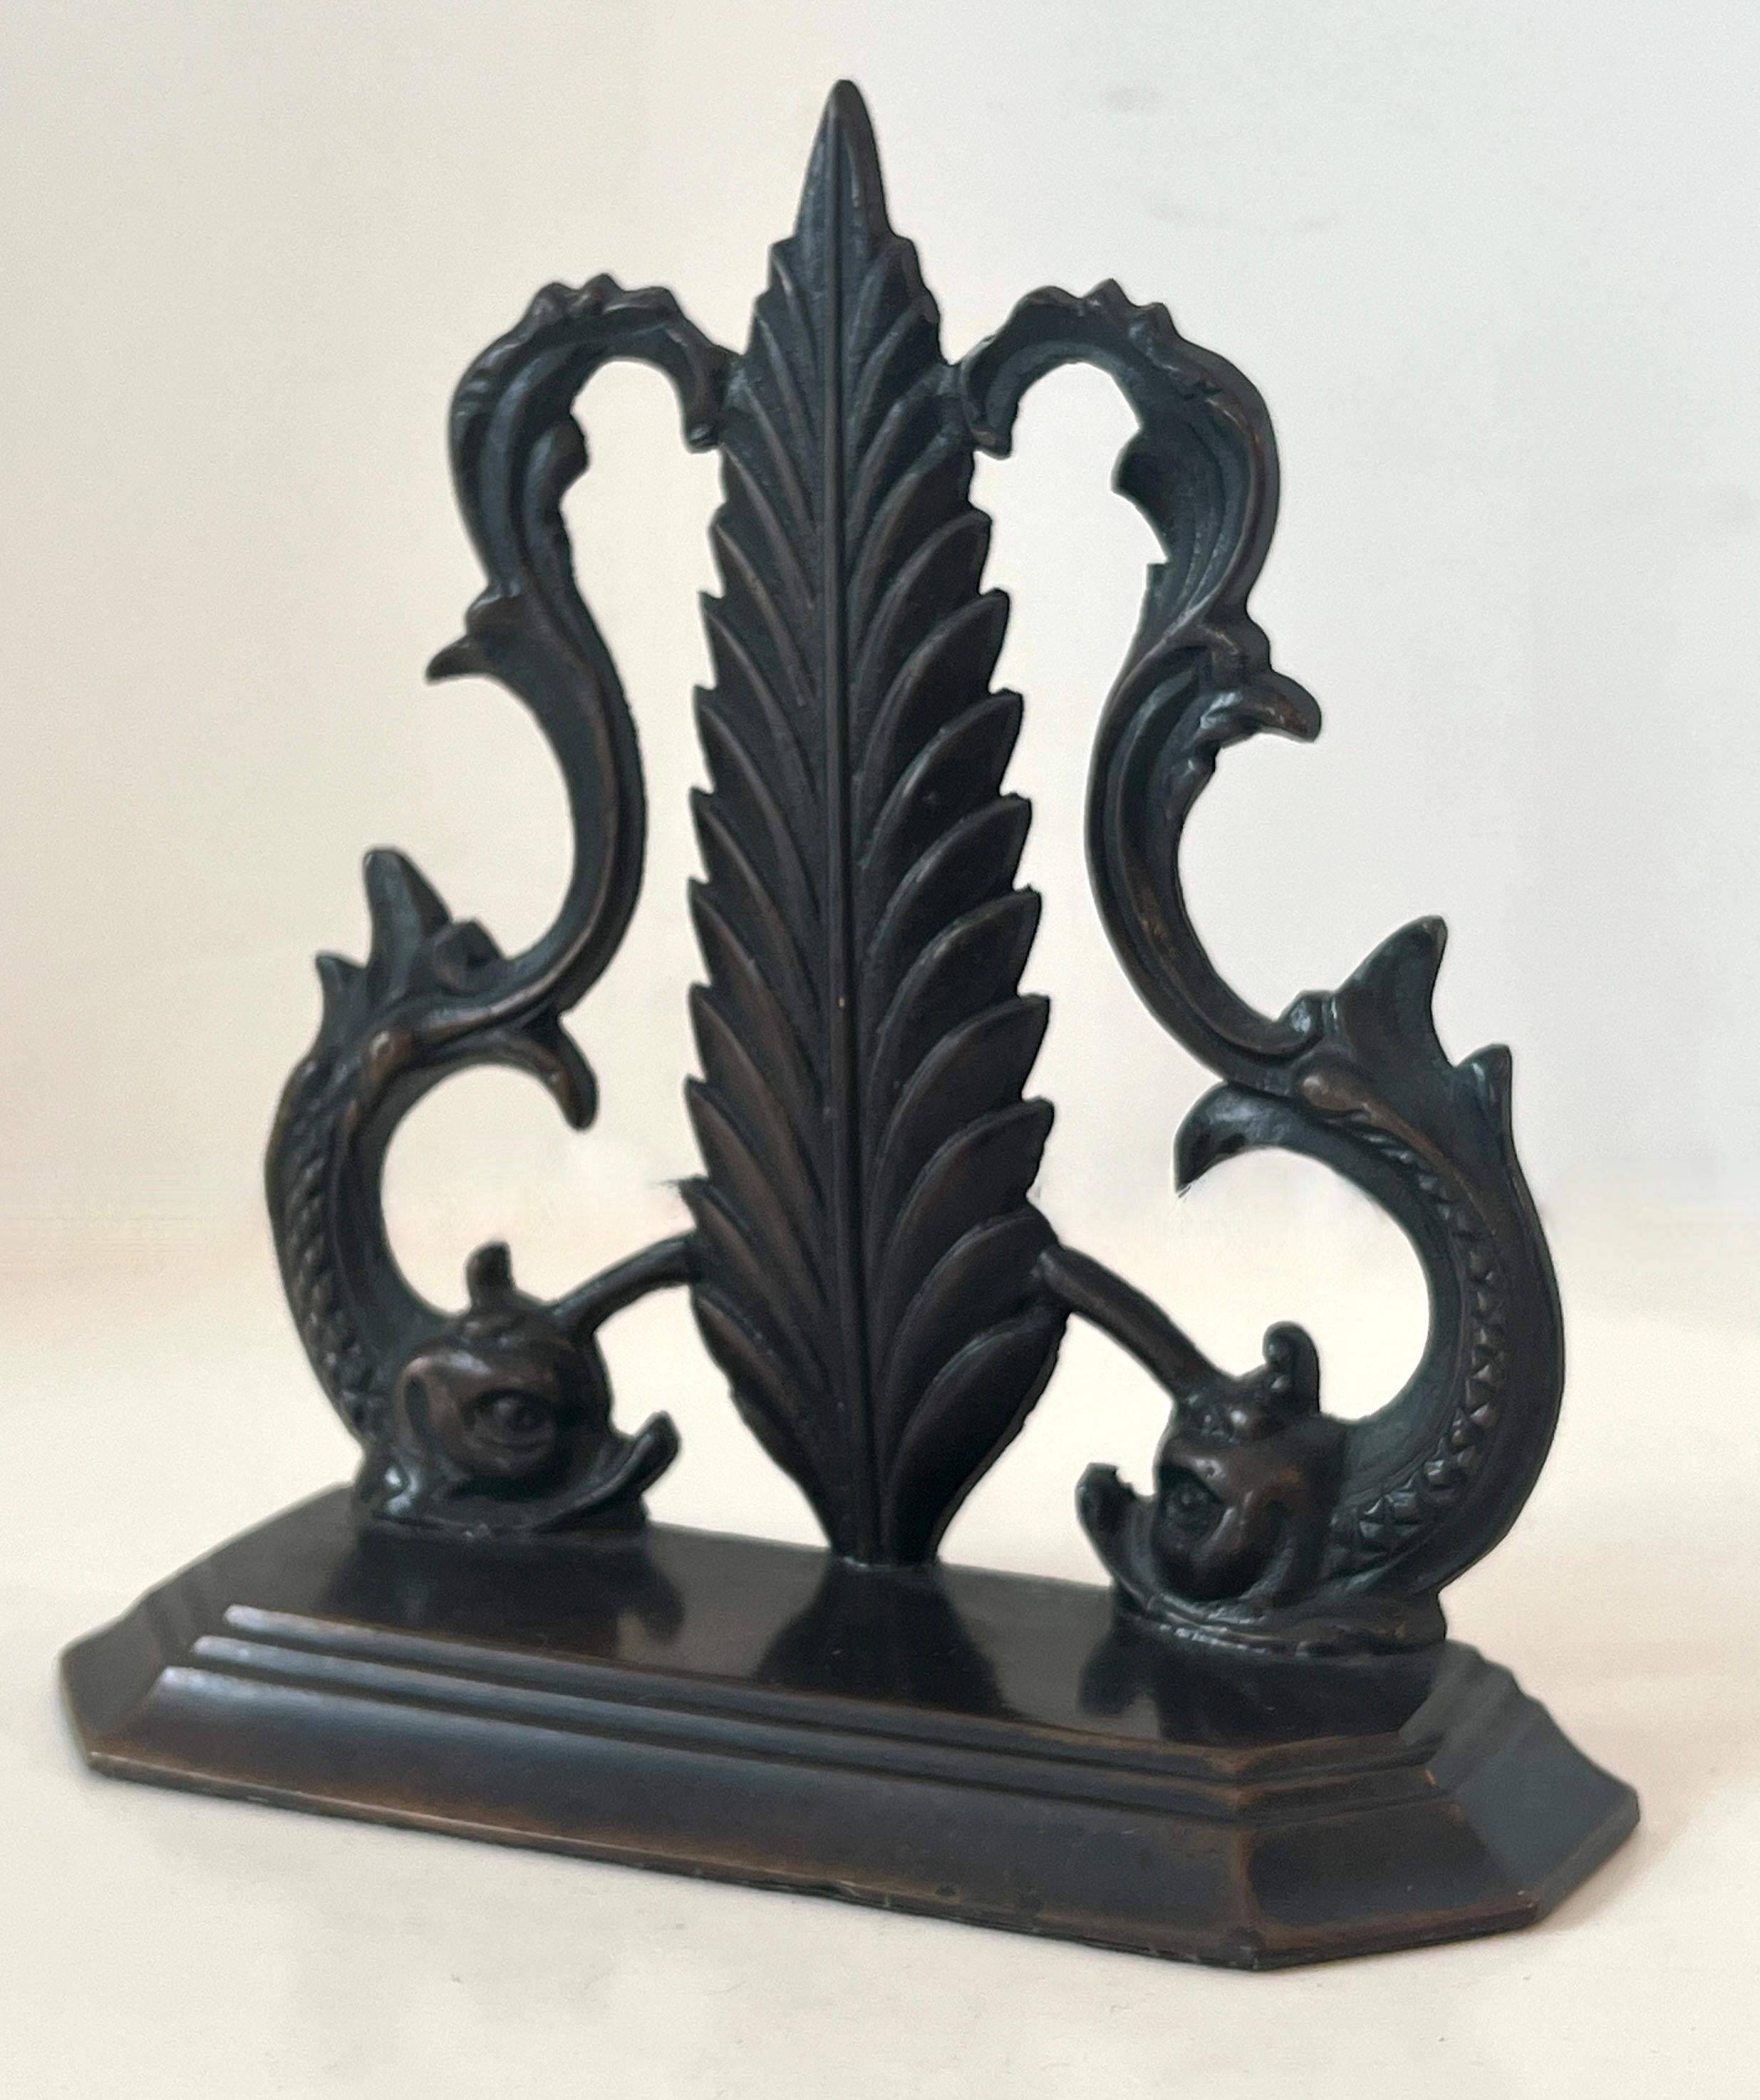 An Bronze door stop with Dolphin Serpents and a center leaf.  

The design is a compliment to any space and very functional.  Heavy enough to hold a door on a windy day and light enough to move from room to room.

A great piece that could also be